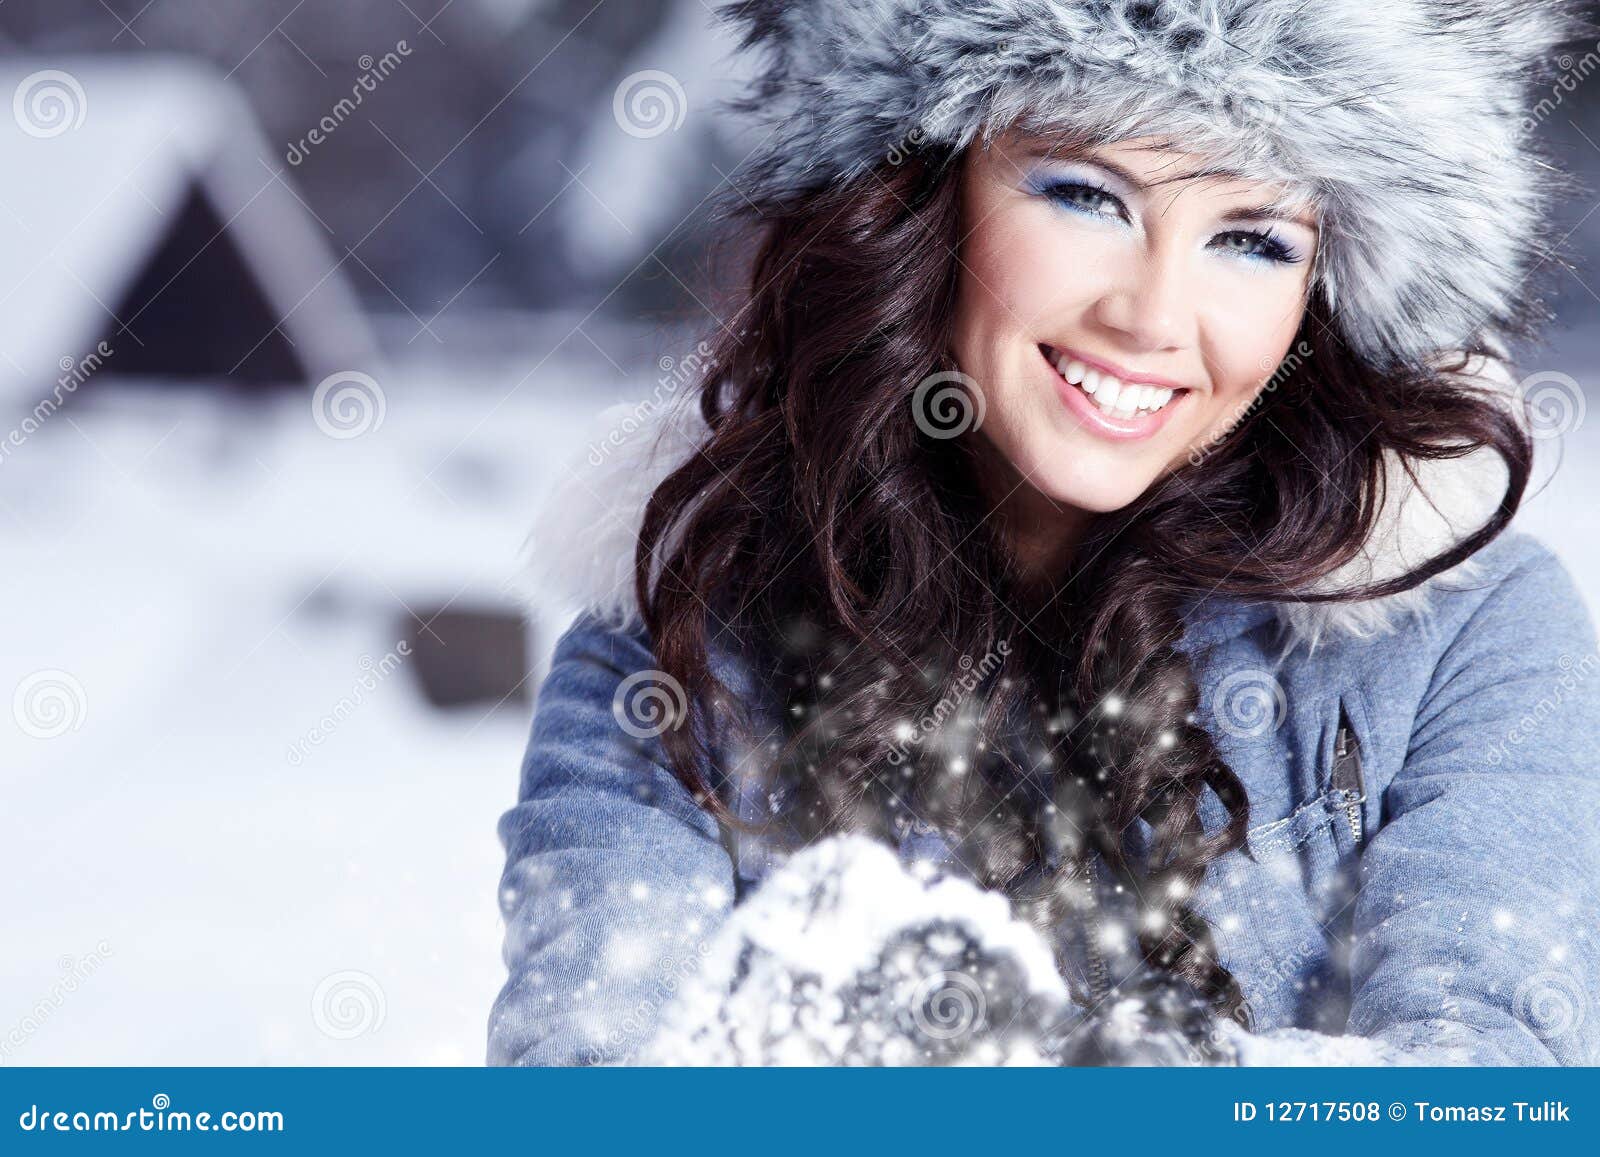 Woman outdoor in winter stock photo. Image of beautiful - 12717508